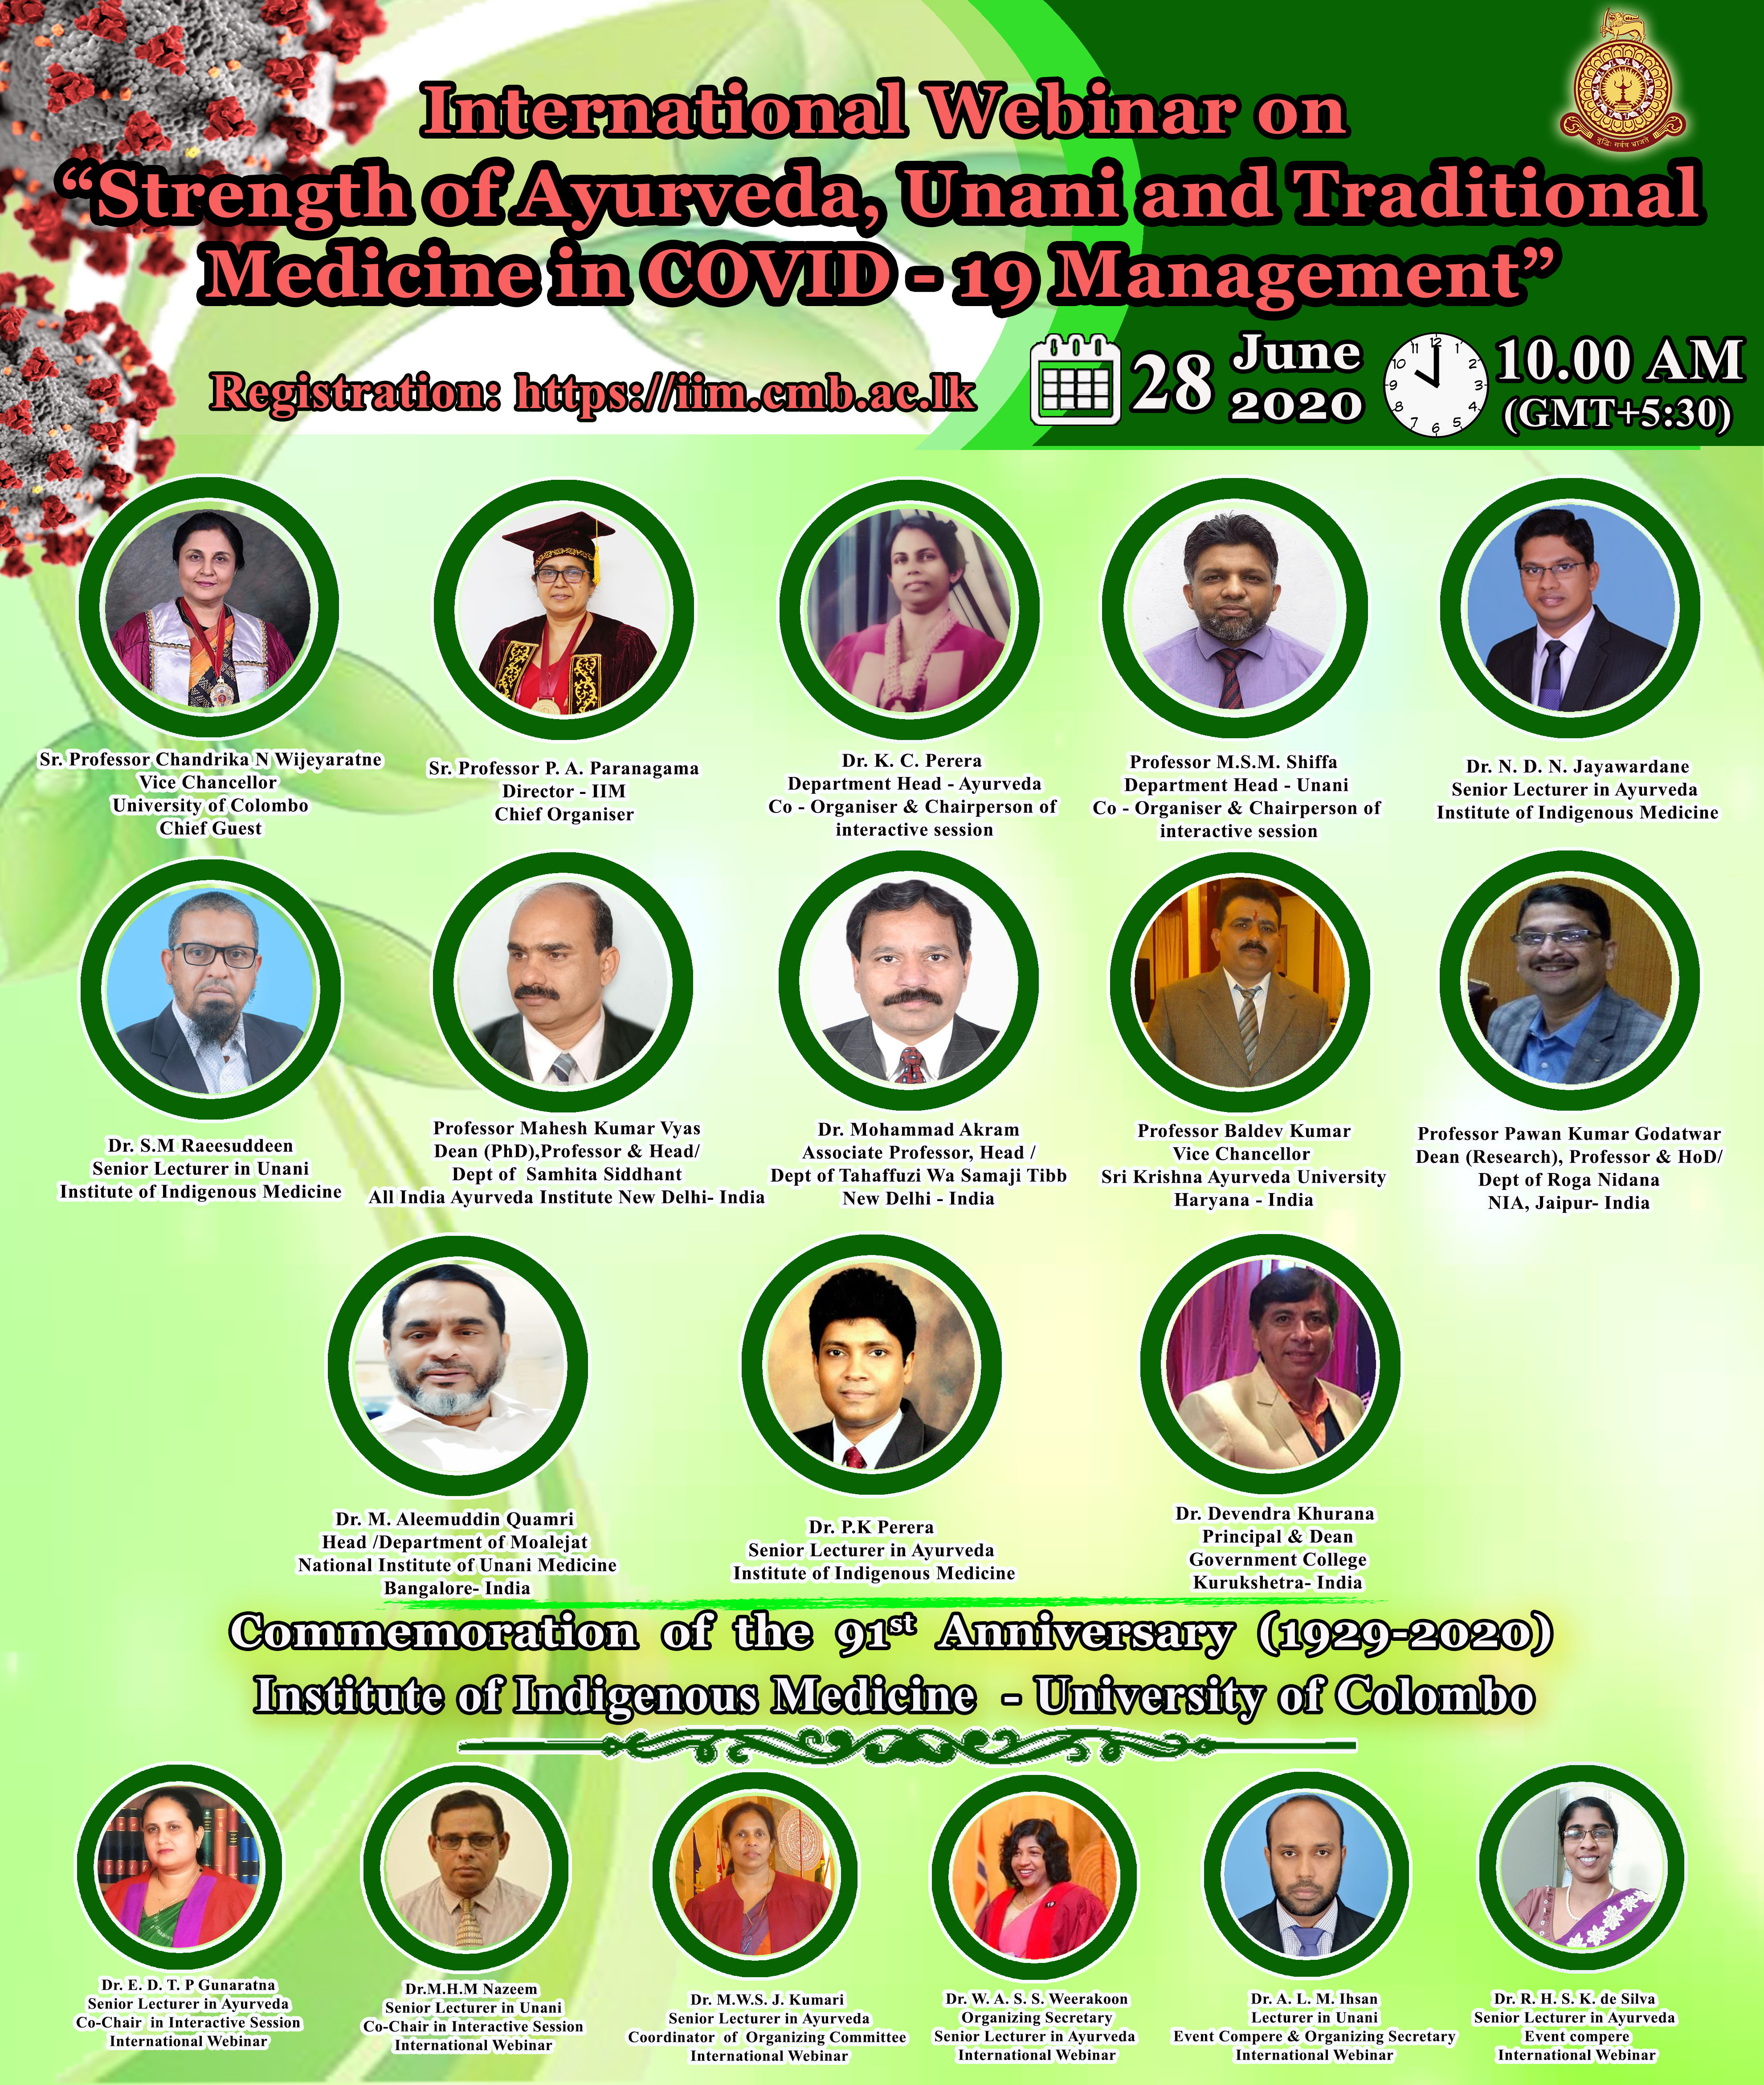 International Webinar on “Strength of Ayurveda, Unani and Traditional Medicine in COVID -19 Management”